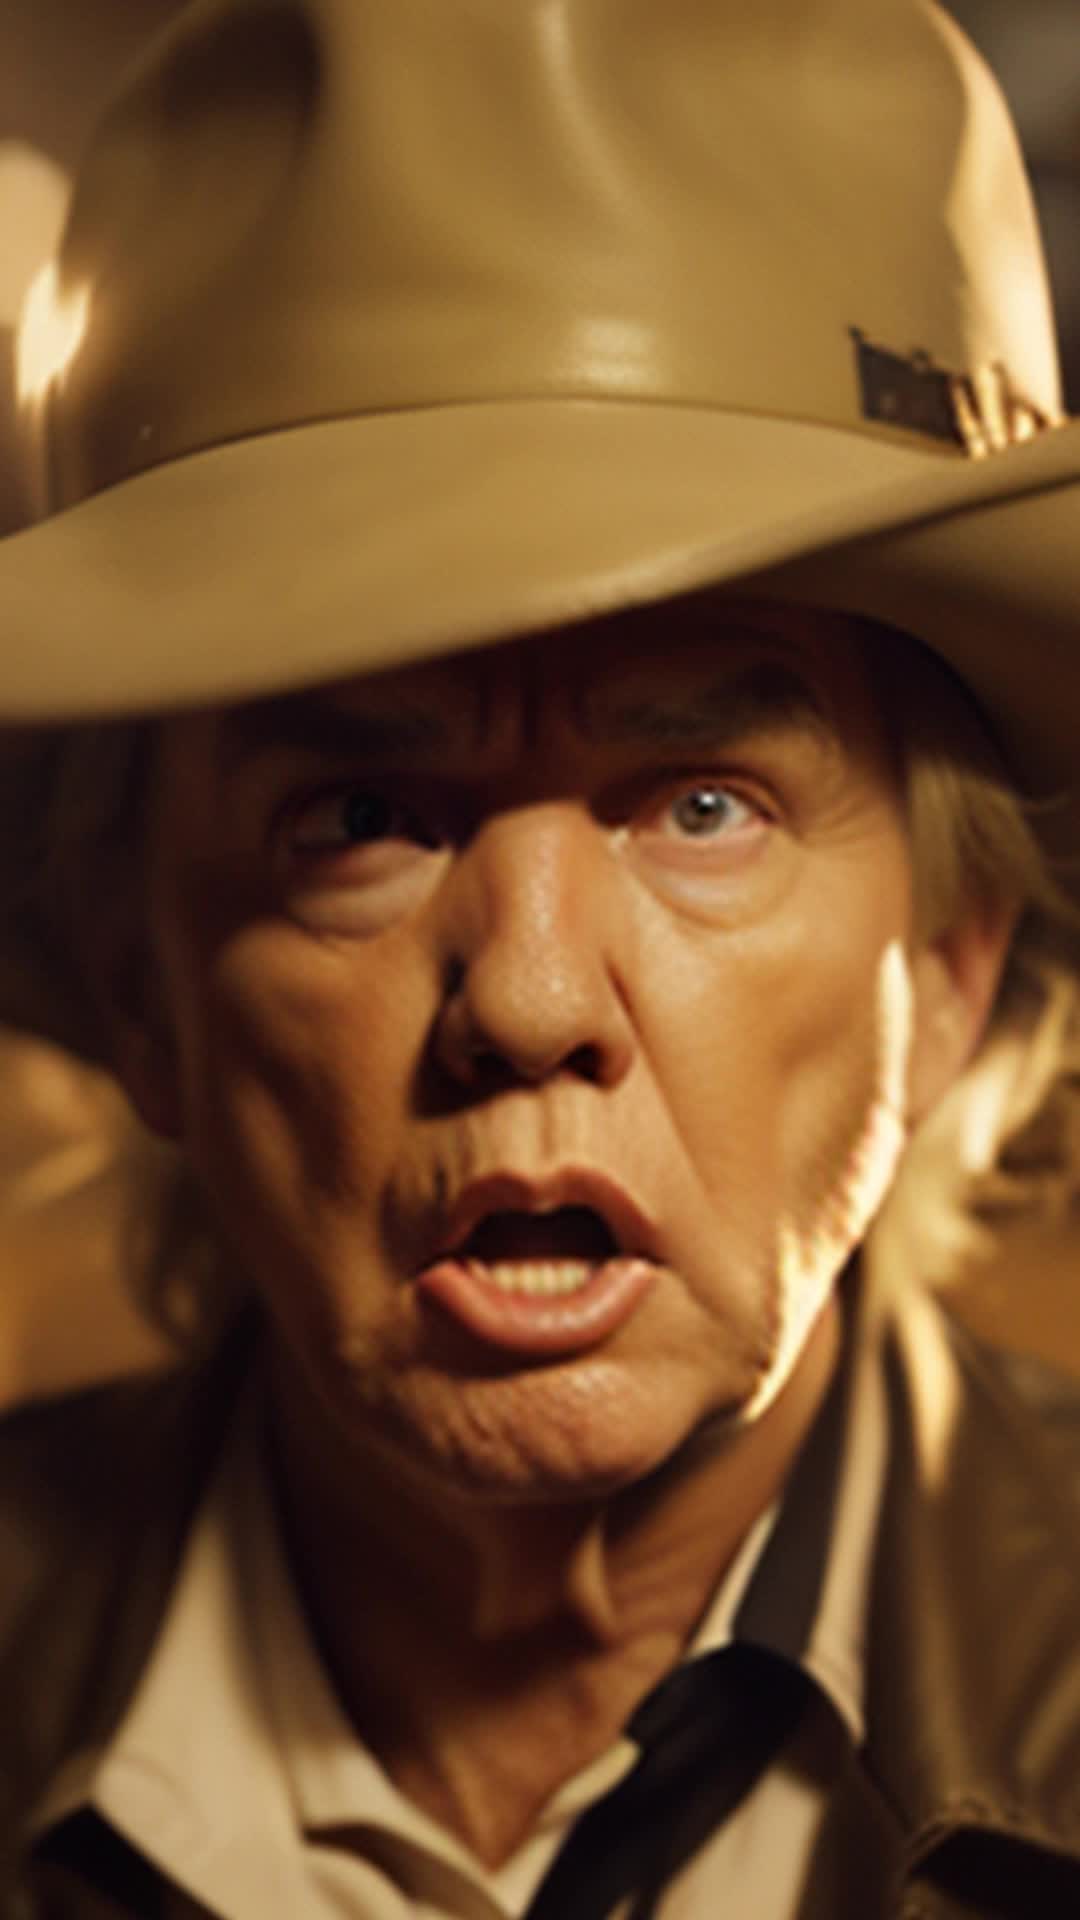 Donald Trump, bewildered expression, handcuffed, courageous blonde country girl, oversized cowboy hat, mixed crowd shock and awe, skillful handcuffing, determined shout, mixed reactions, soft and dramatic lighting, close-up on expressions